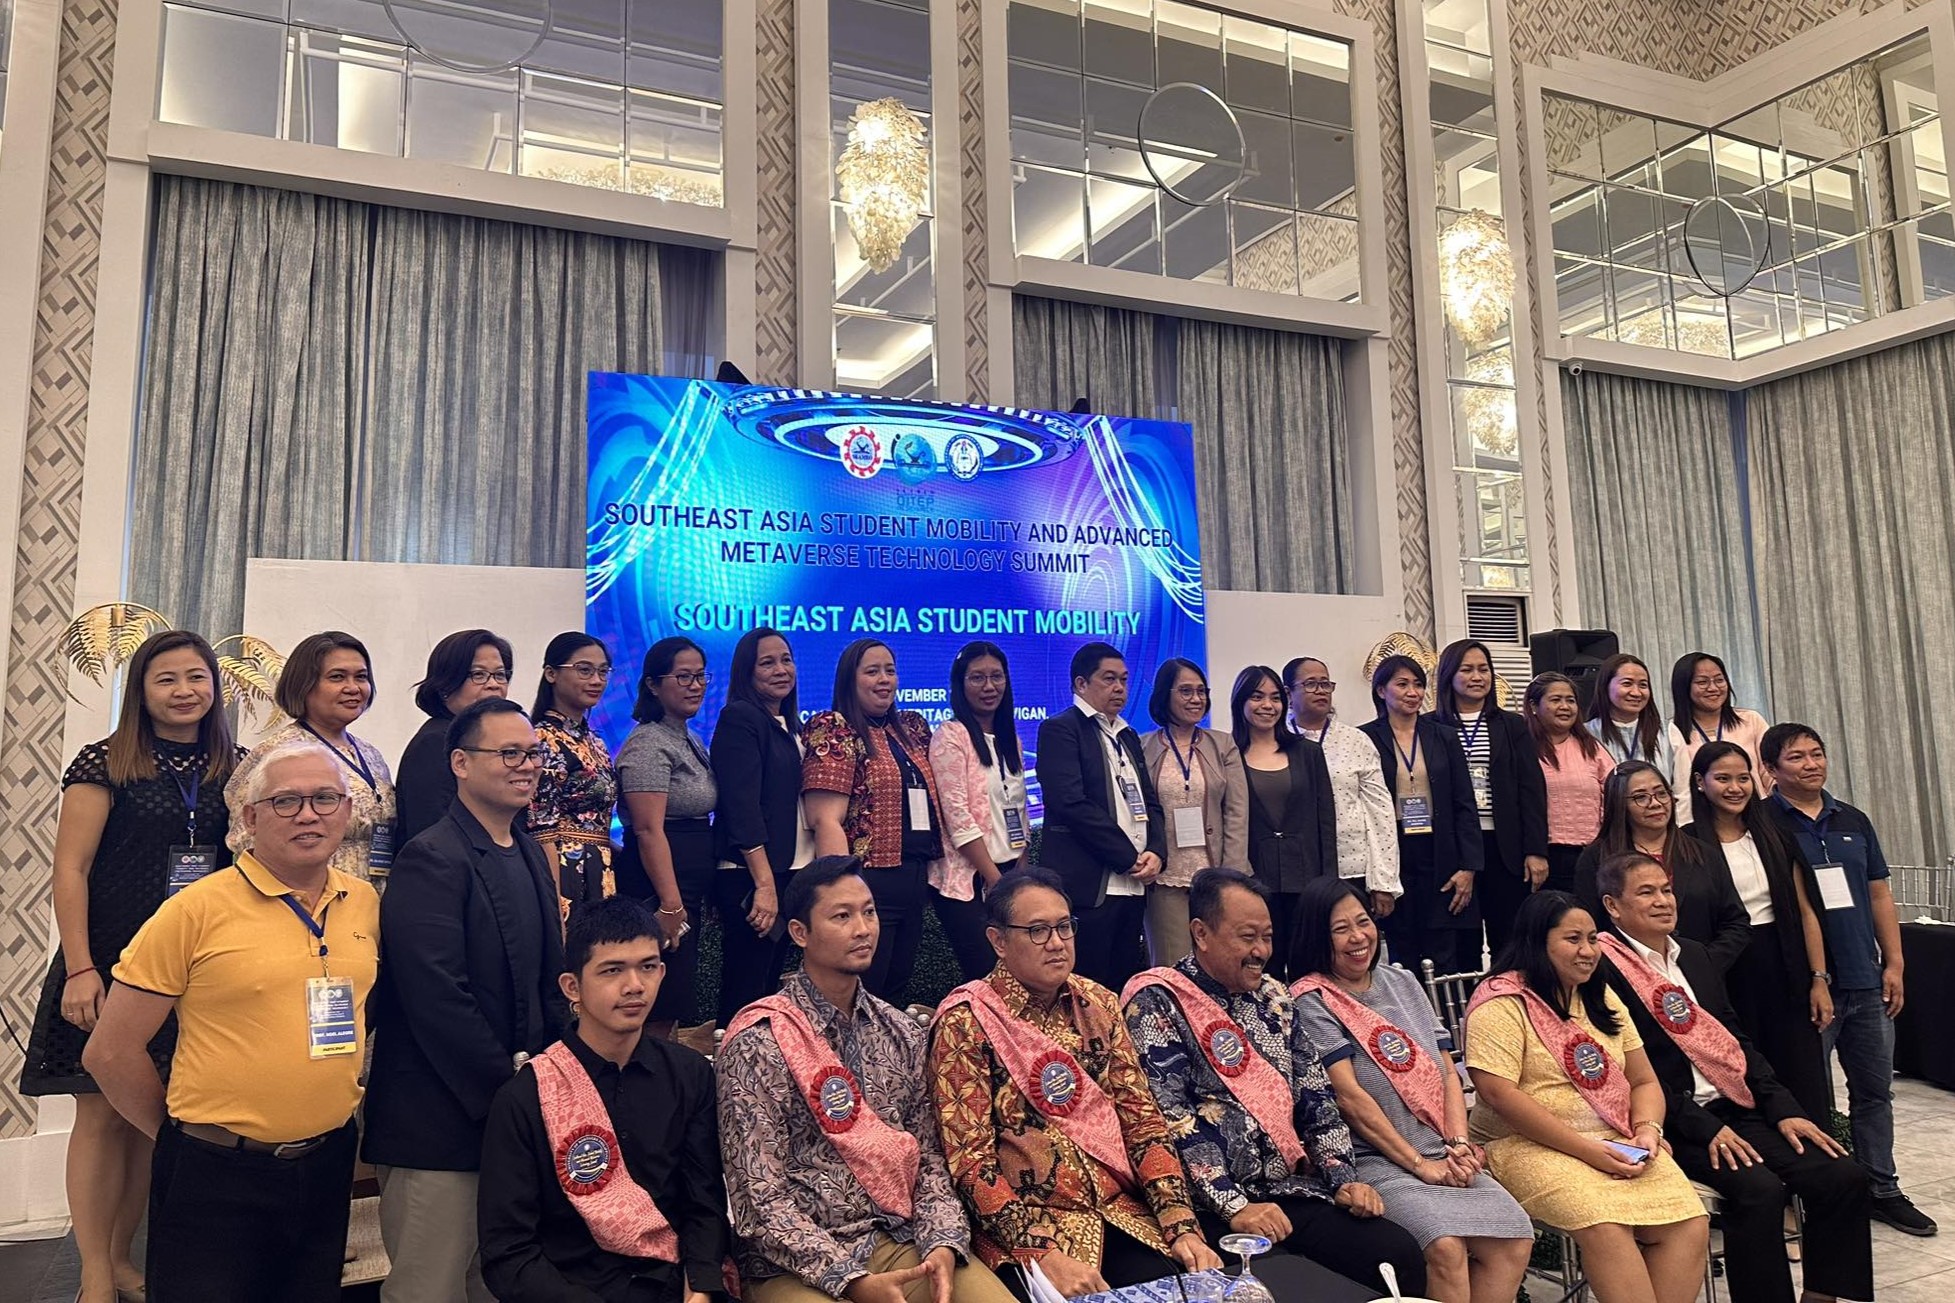 CREDO, CAYETANO ATTEND SOUTHEAST ASIA STUDENT MOBILITY AND ADVANCED METAVERSE TECHNOLOGY SUMMIT